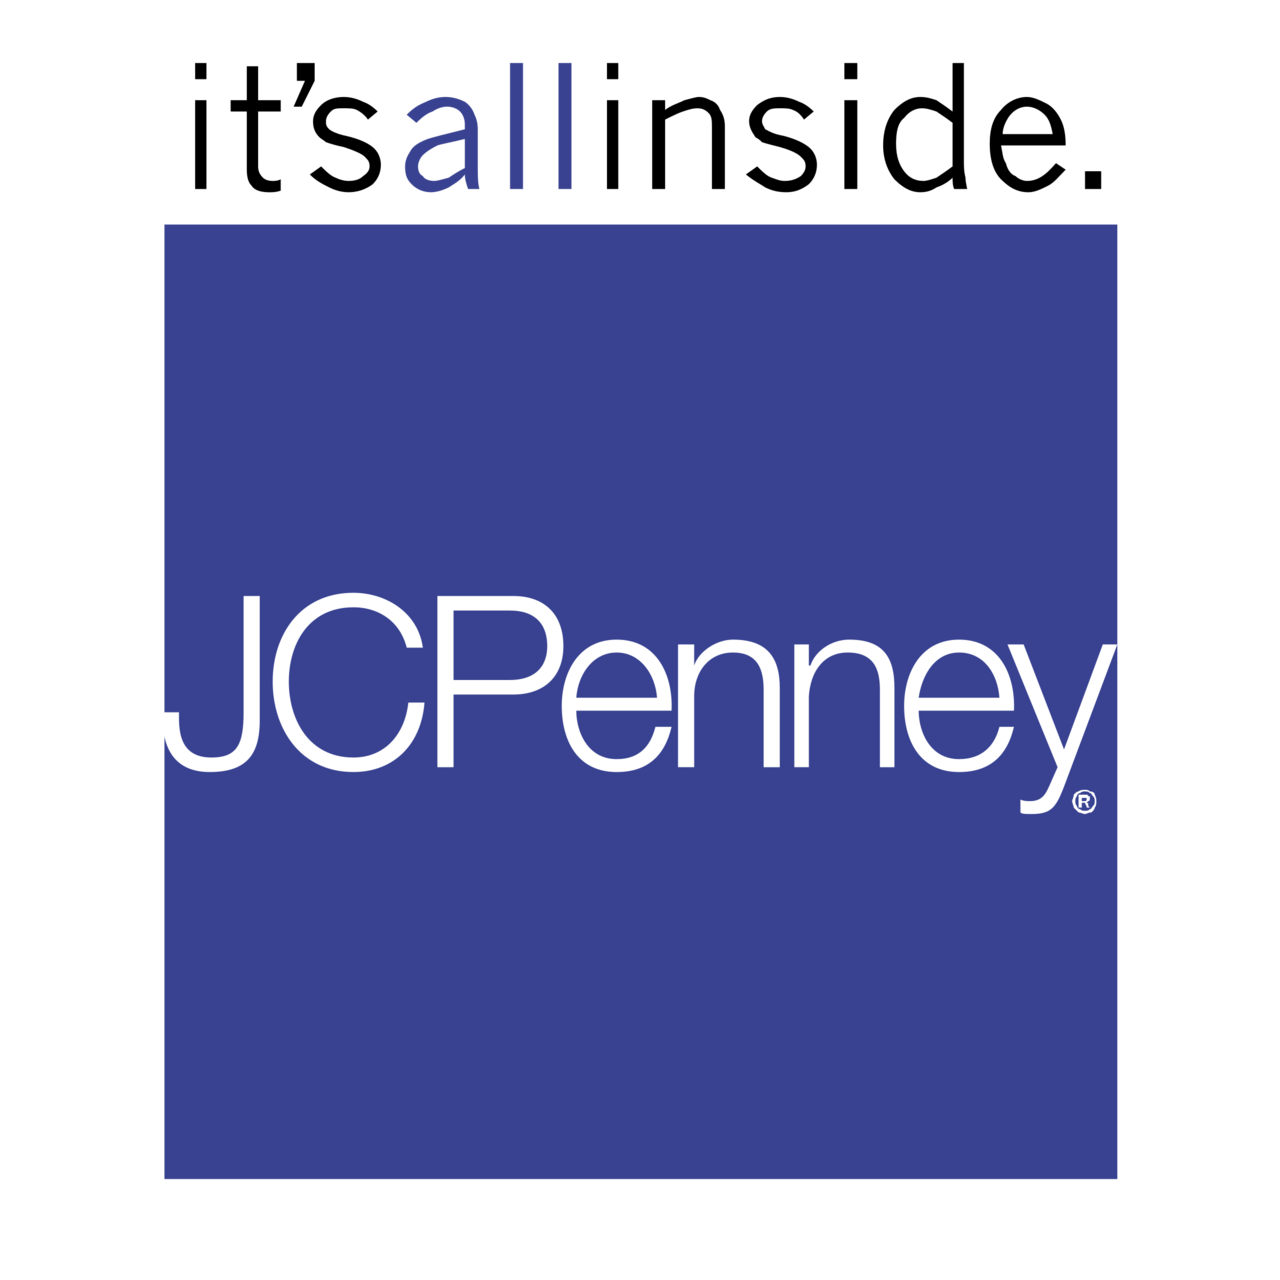 download-jcpenney-logo-png-and-vector-pdf-svg-ai-eps-free